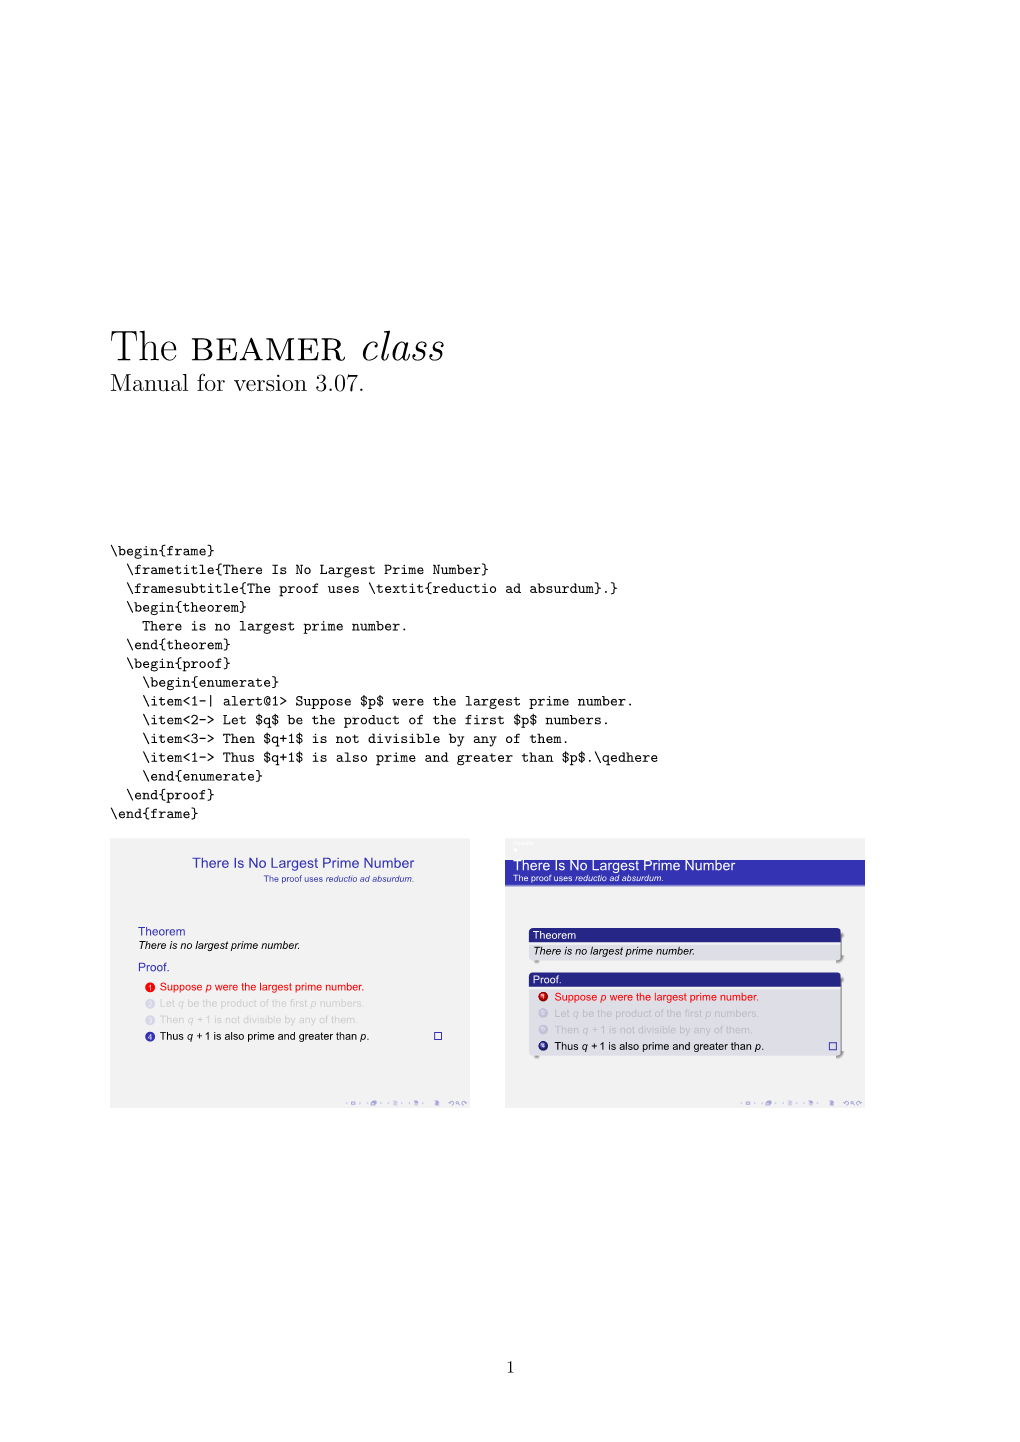 The Beamer Class Manual for Version 3.07